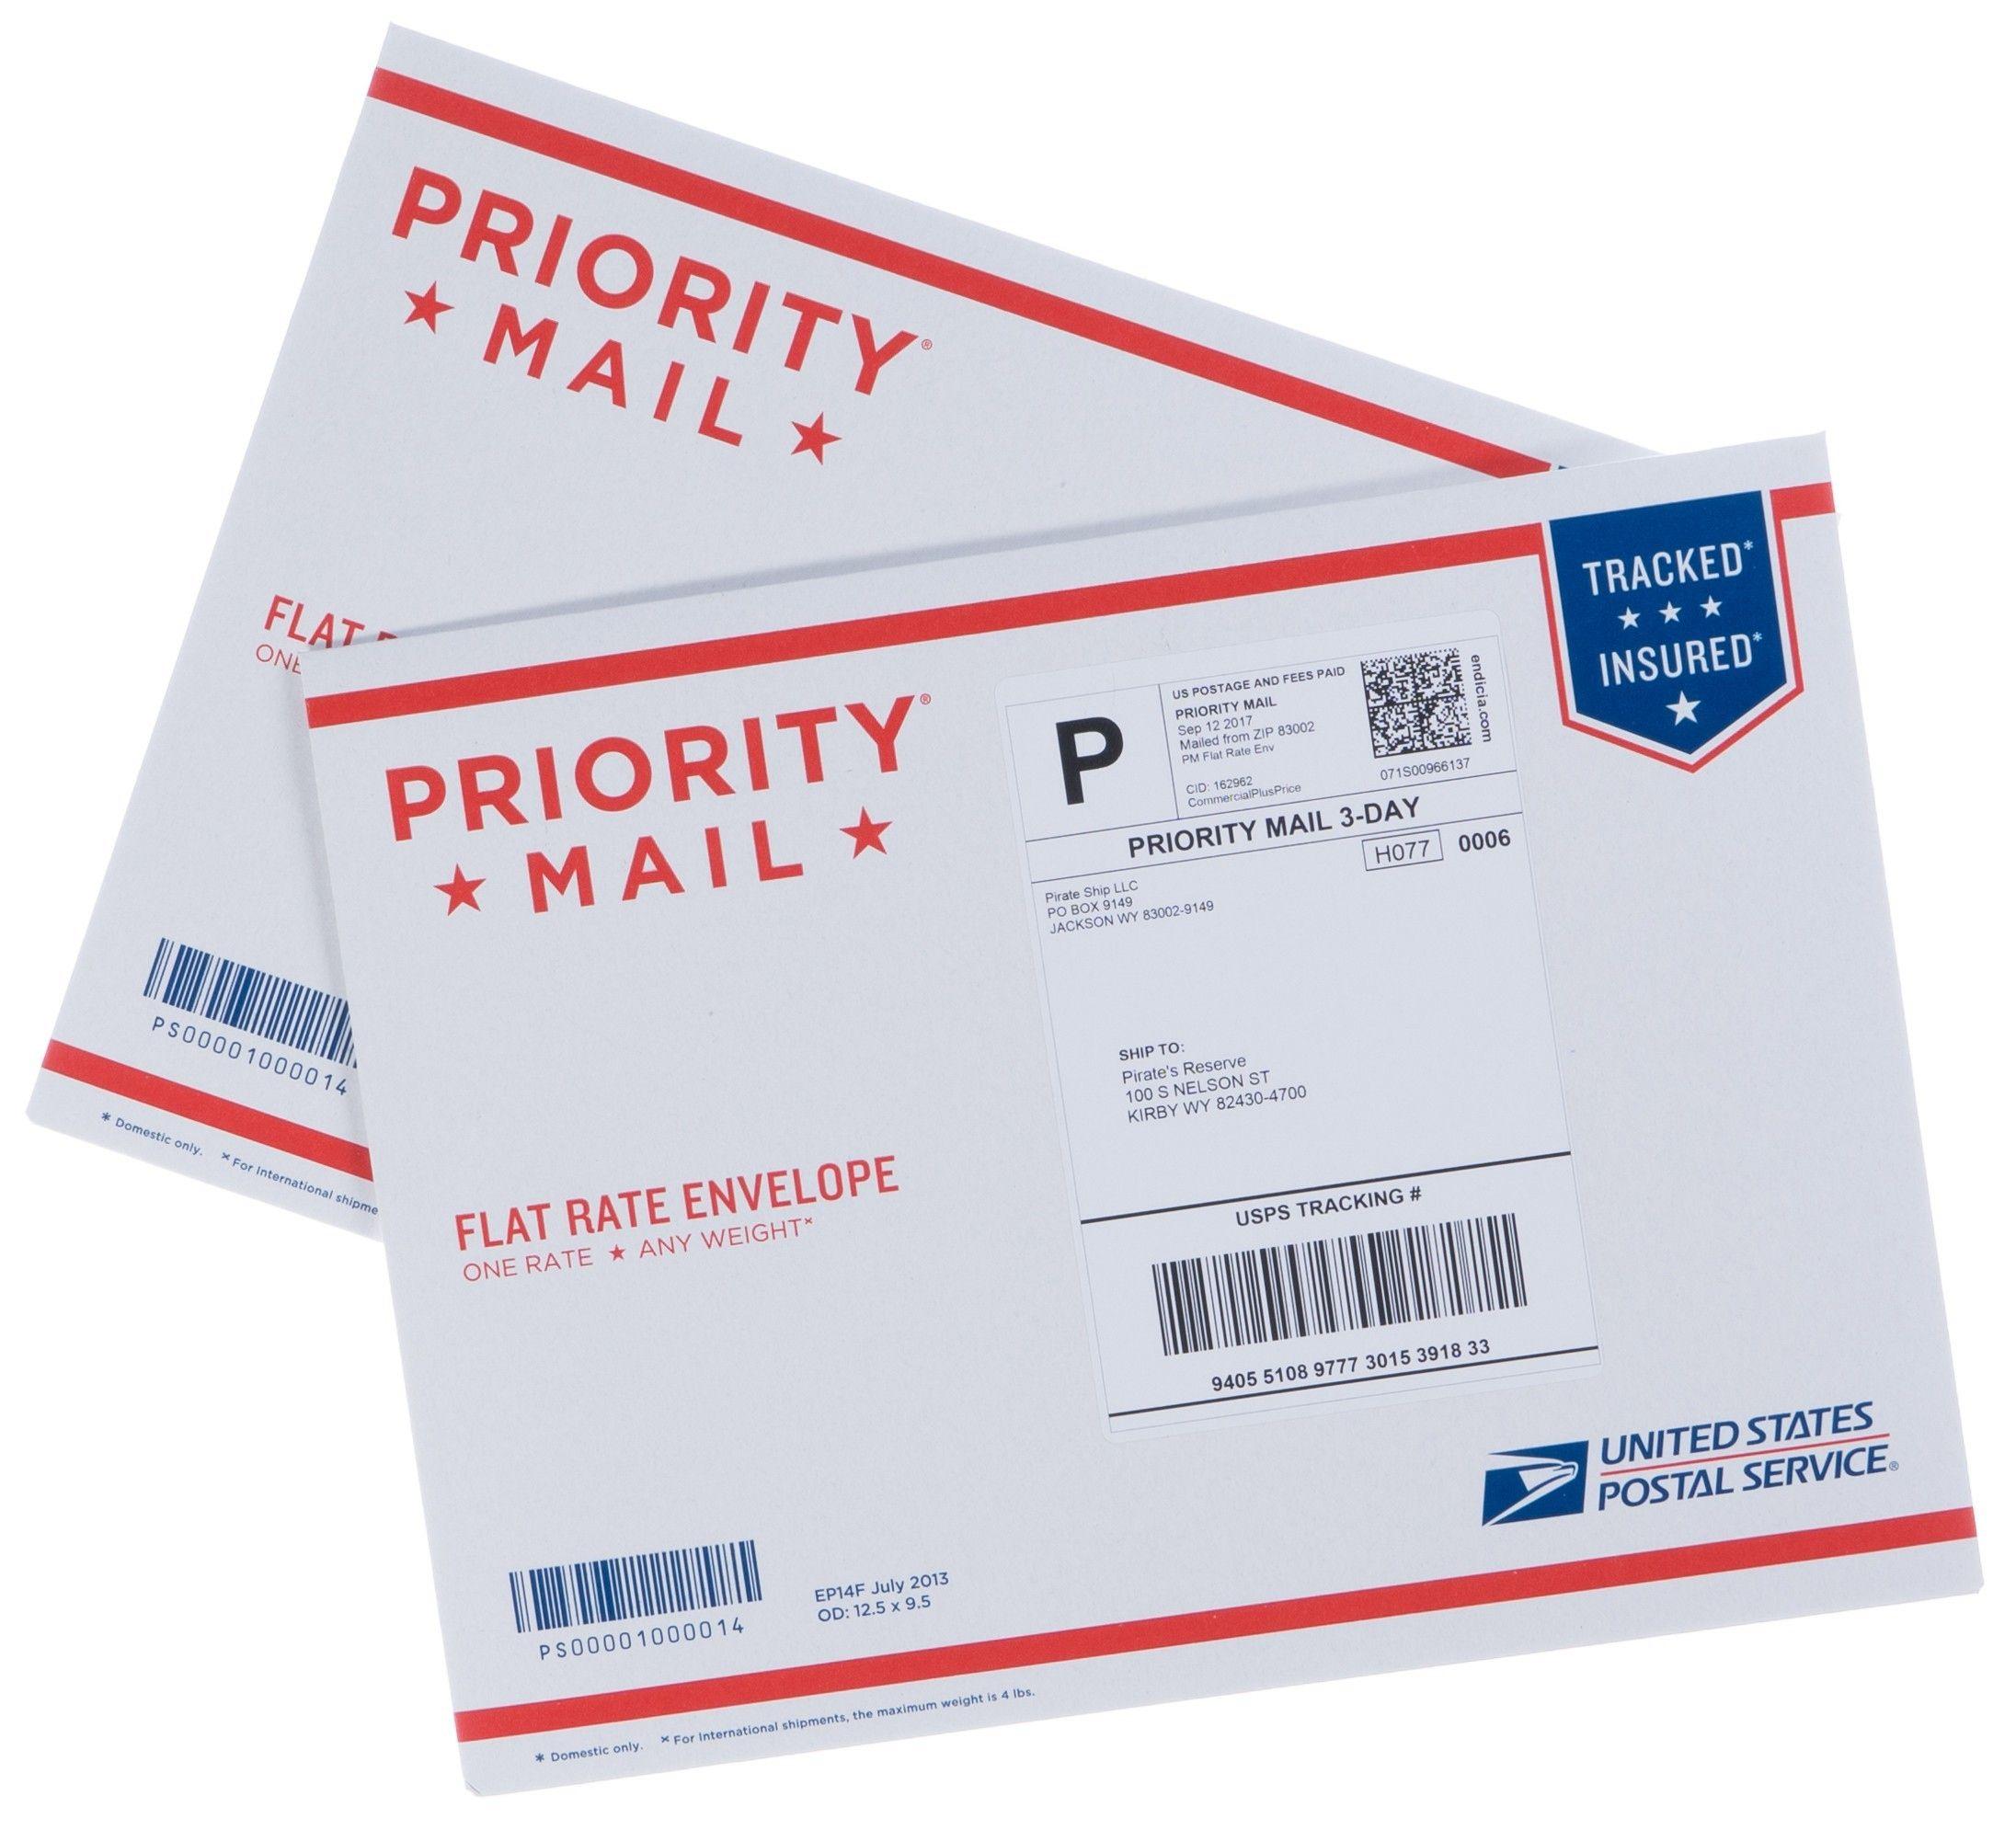 USPS Letterhead Logo - Make Usps Shipping Label Elegant the Cheapest Way to Ship Everything